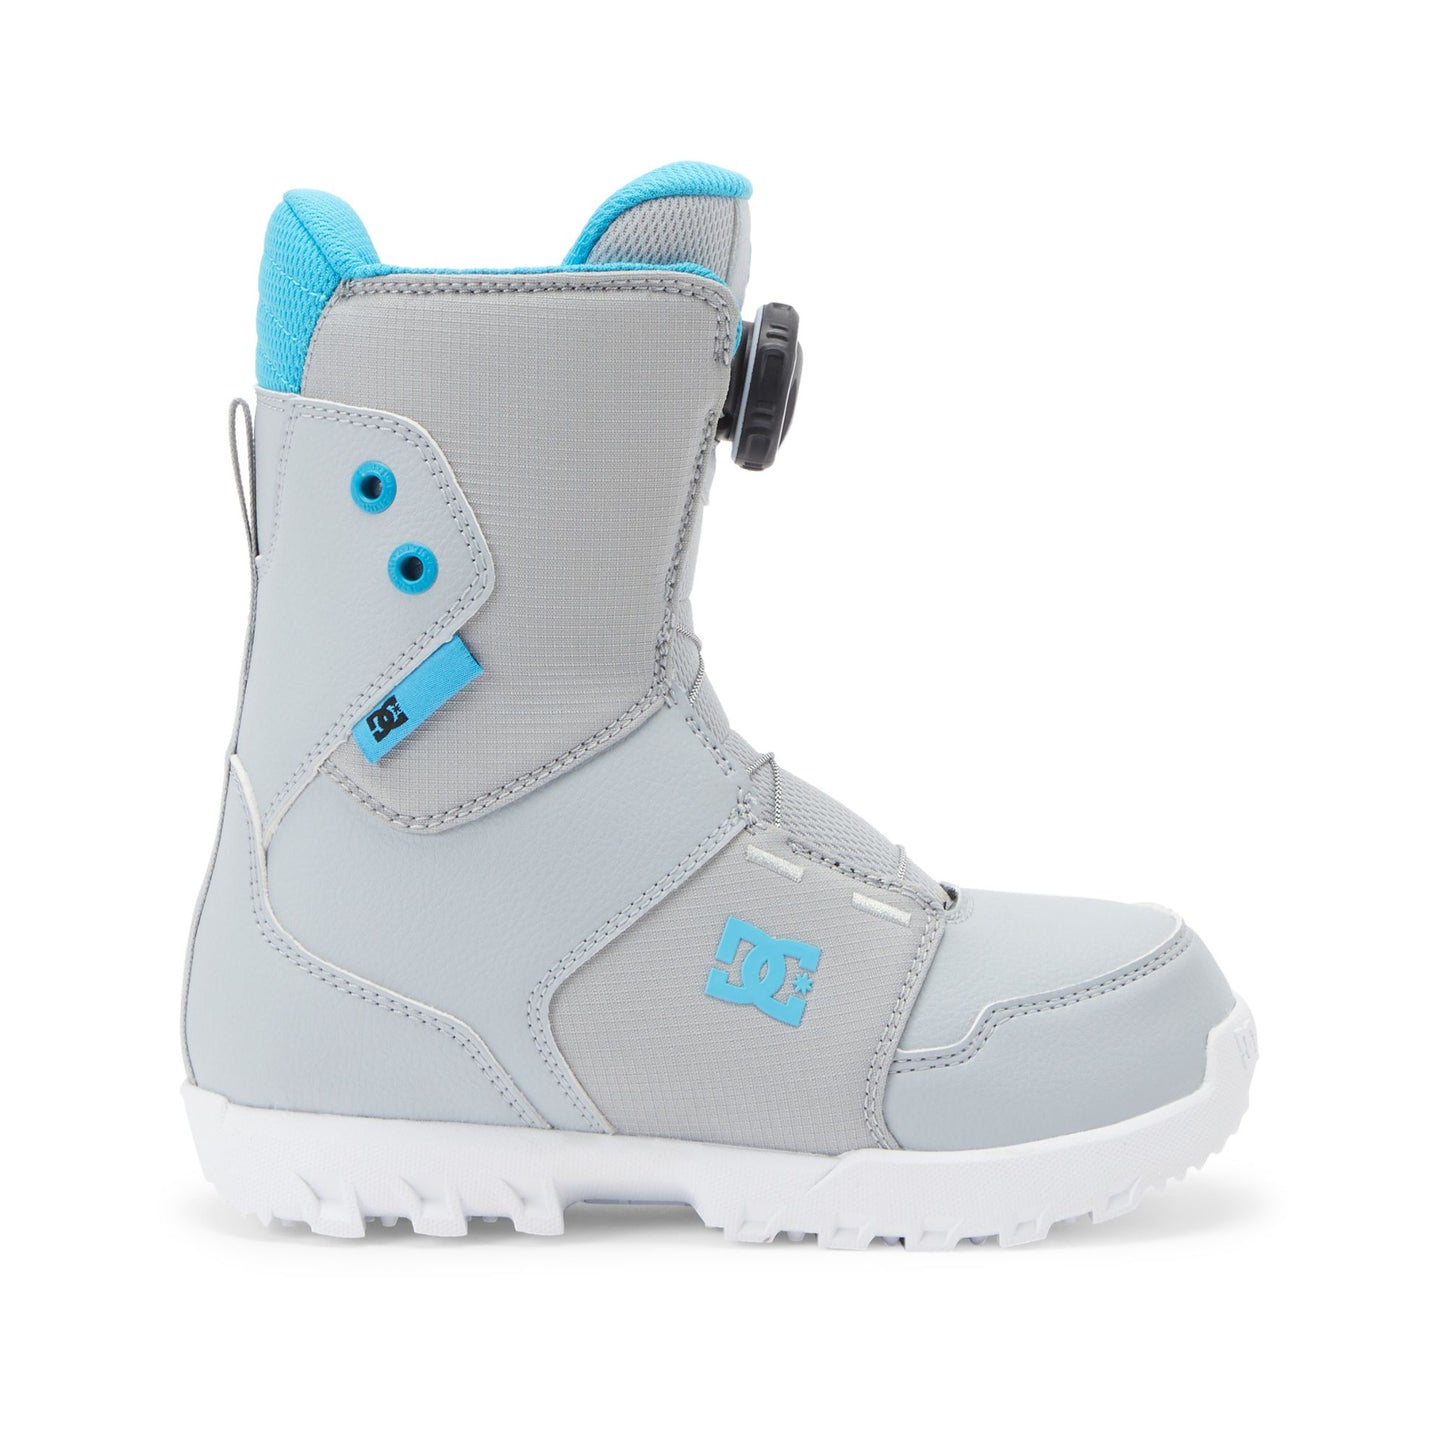 DC Youth Scout BOA Snowboard Boots Grey Blue Snowboard Boots